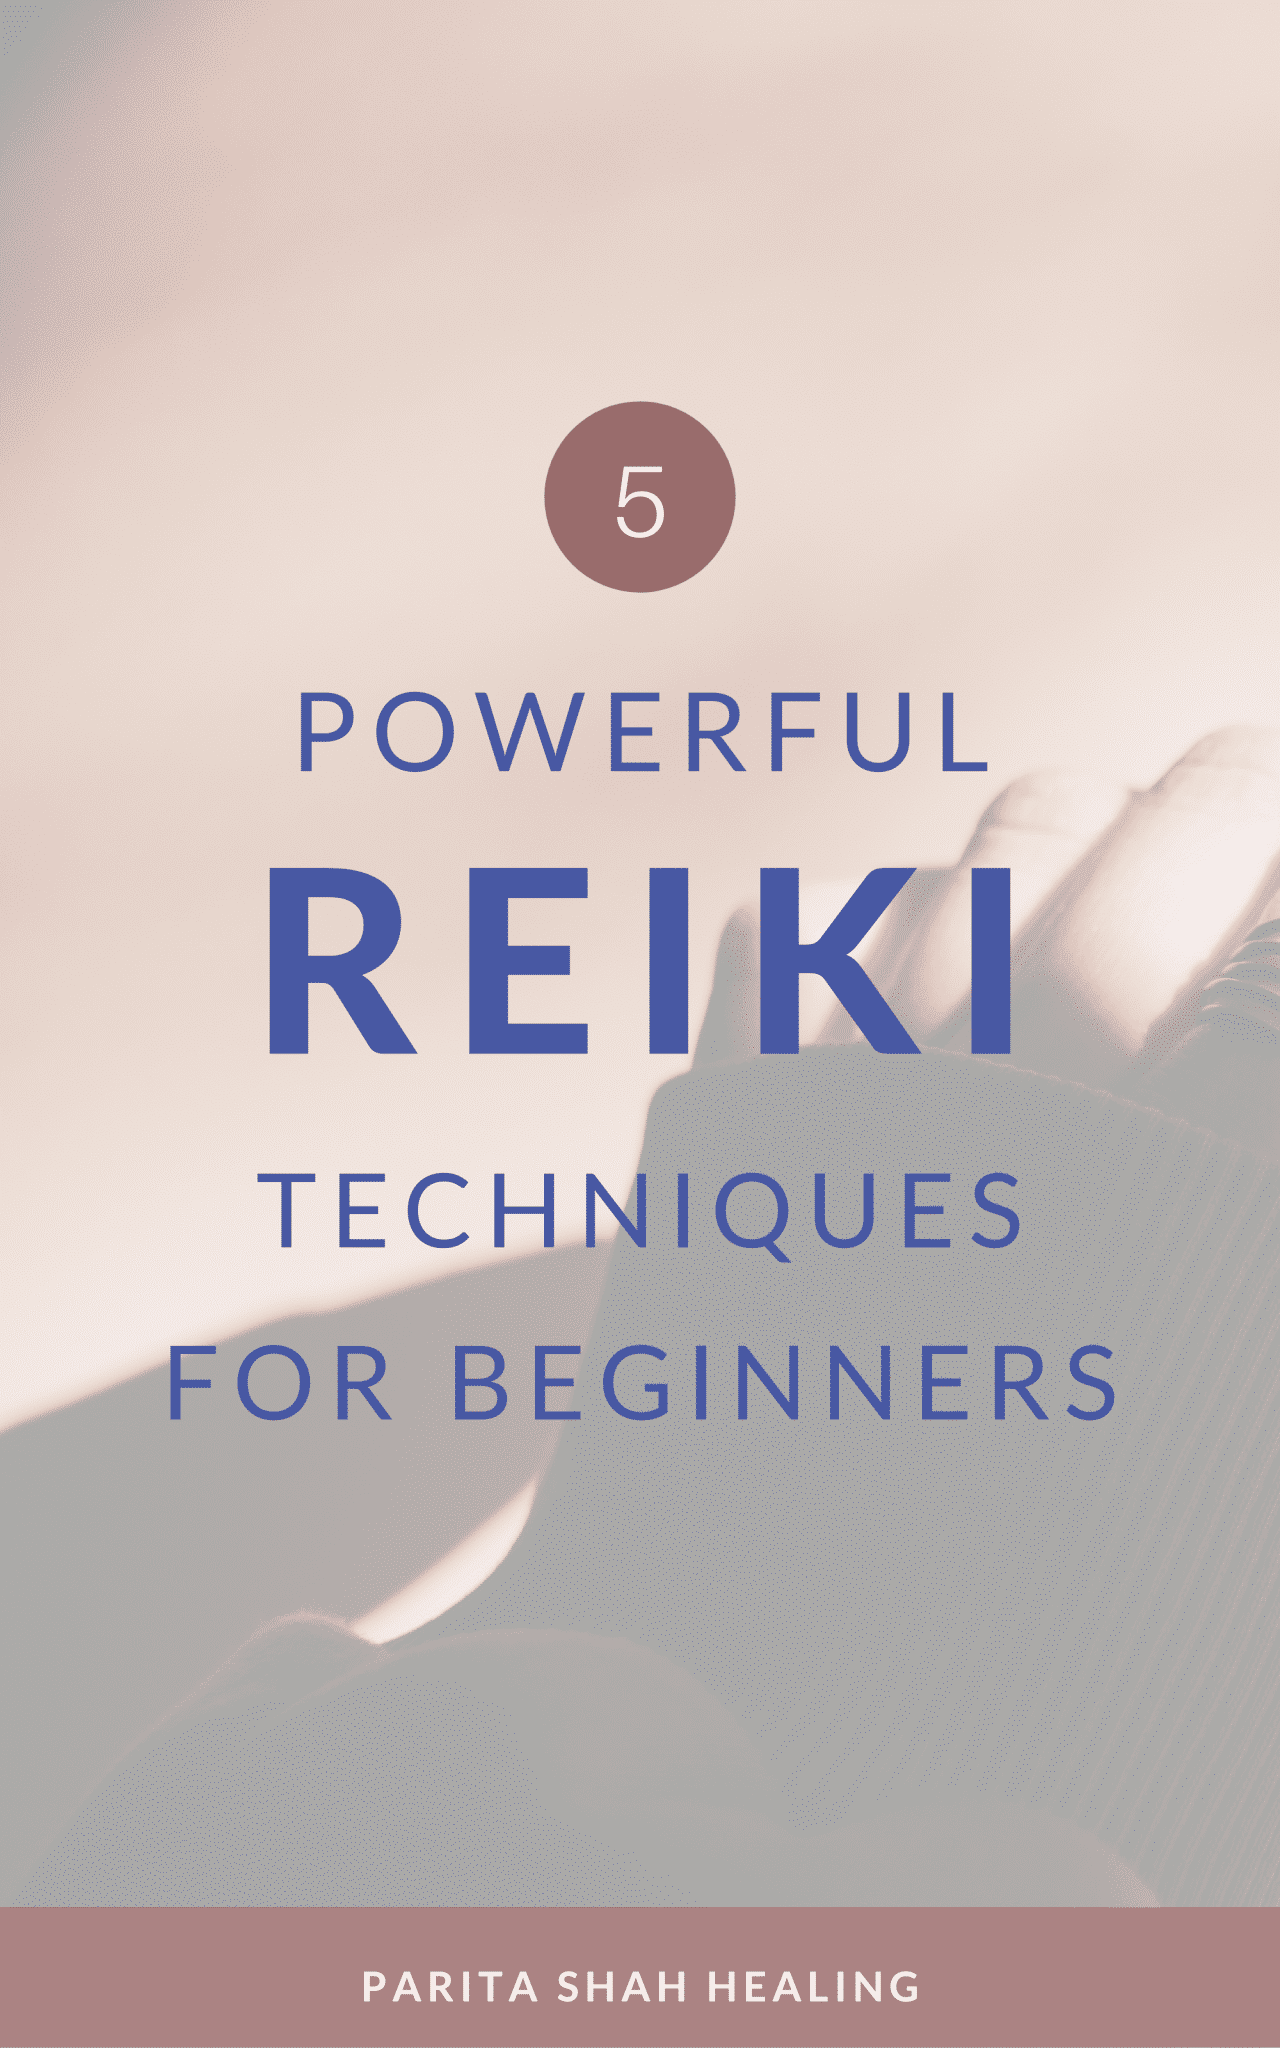 5 Powerful Usui Reiki Meditations and Techniques for Beginners